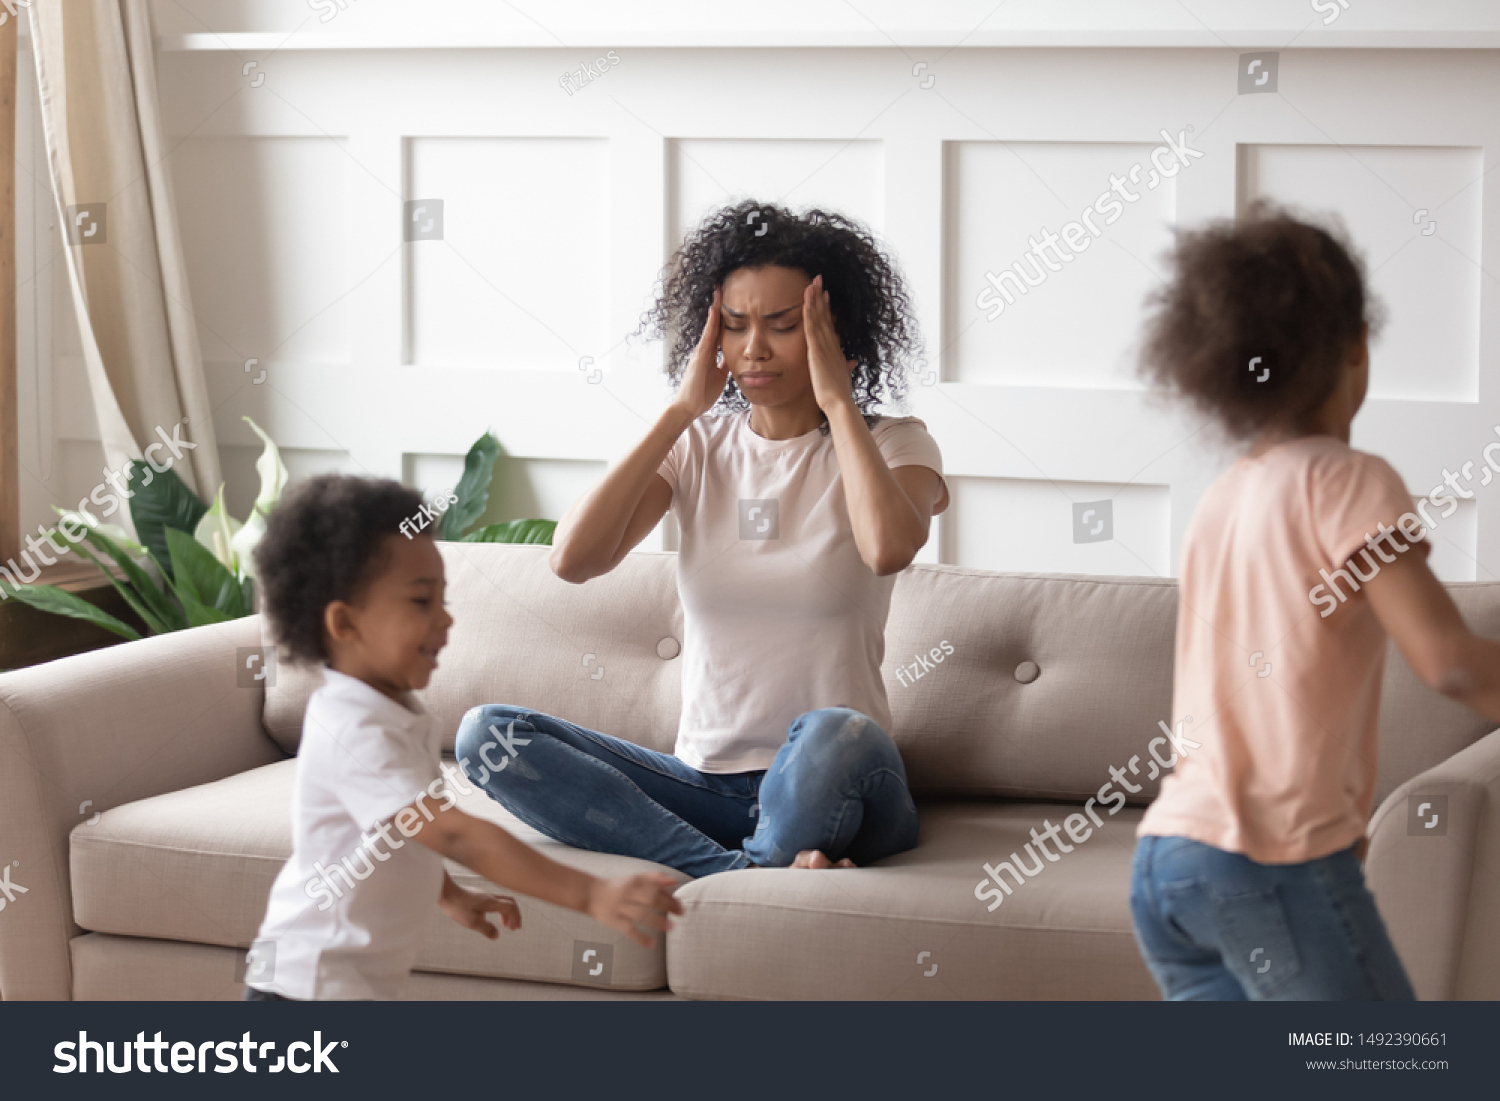 African mother sit on sofa closed eyes touch temples having severe headache or migraine because of noise of little crazy children running near her. Tired exhausted mom, upbringing difficulties concept #1492390661